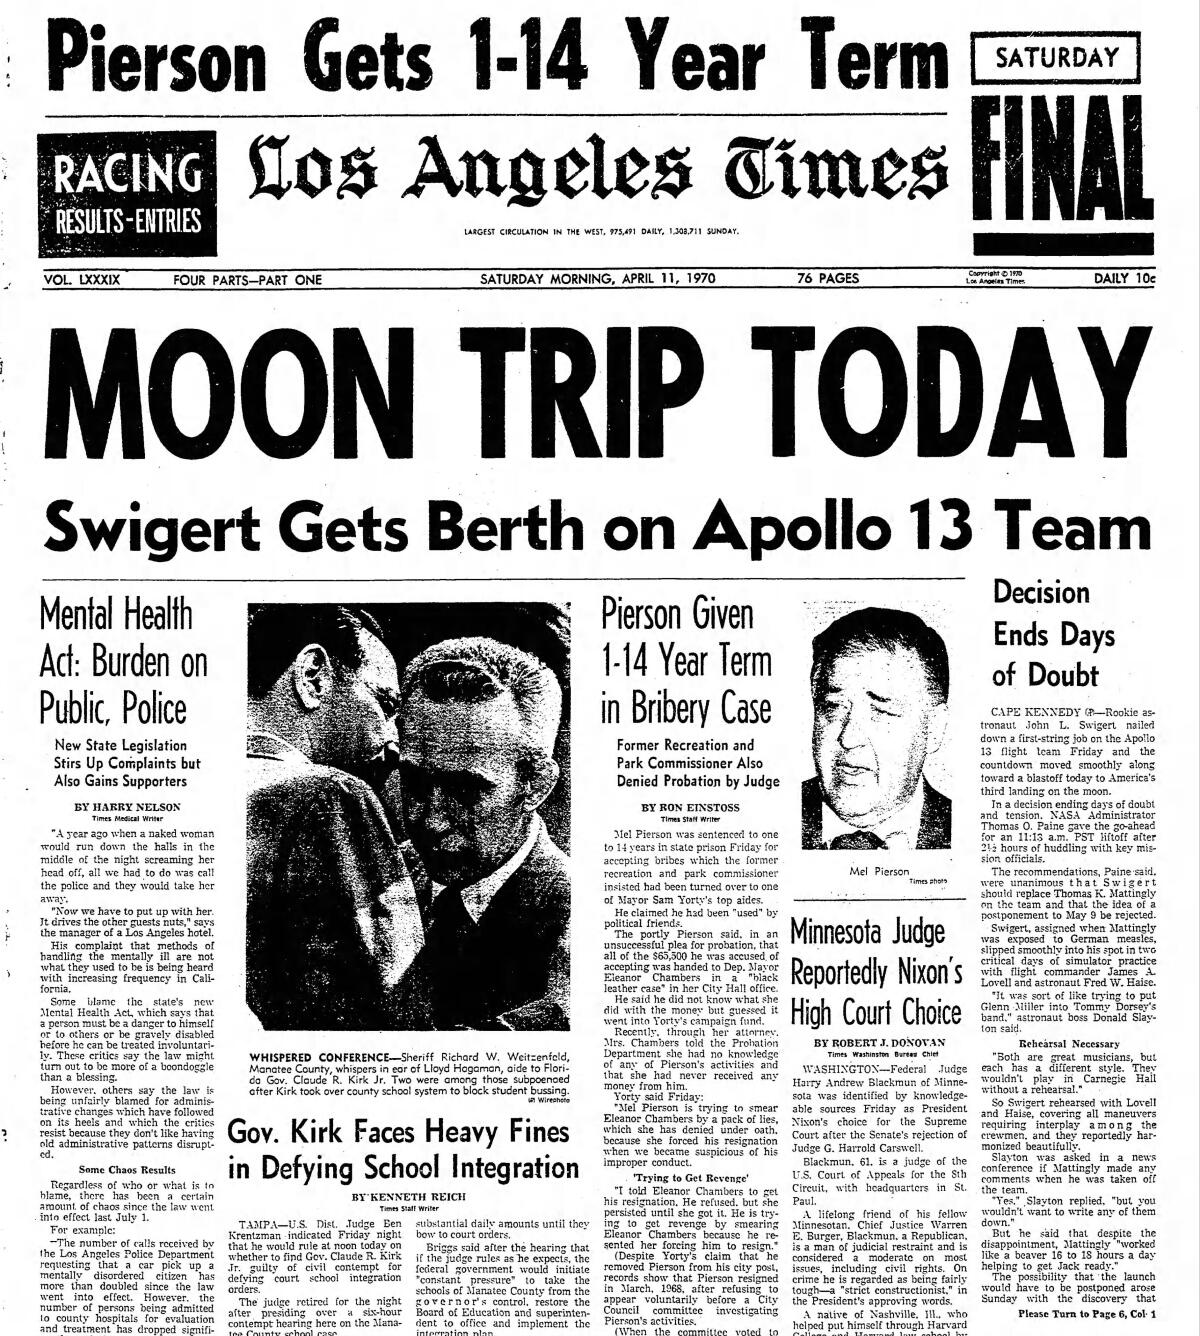 The front page of the Los Angeles Times on April 11, 1970.